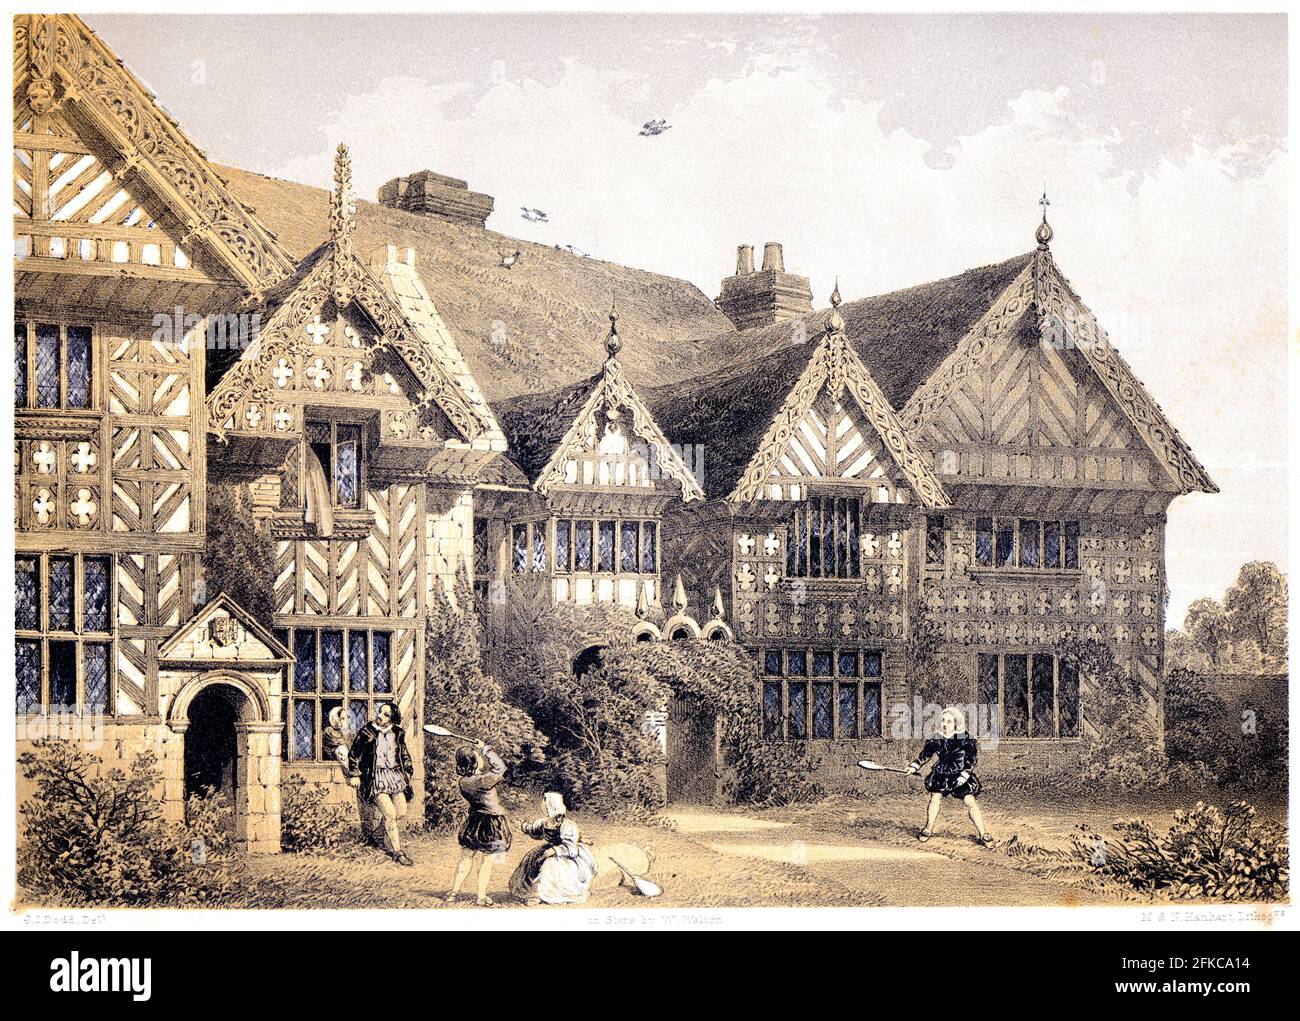 A lithotint of Speke Hall, The Garden Front, Lancashire UK scanned at high resolution from a book printed in 1858. Believed copyright free. Stock Photo